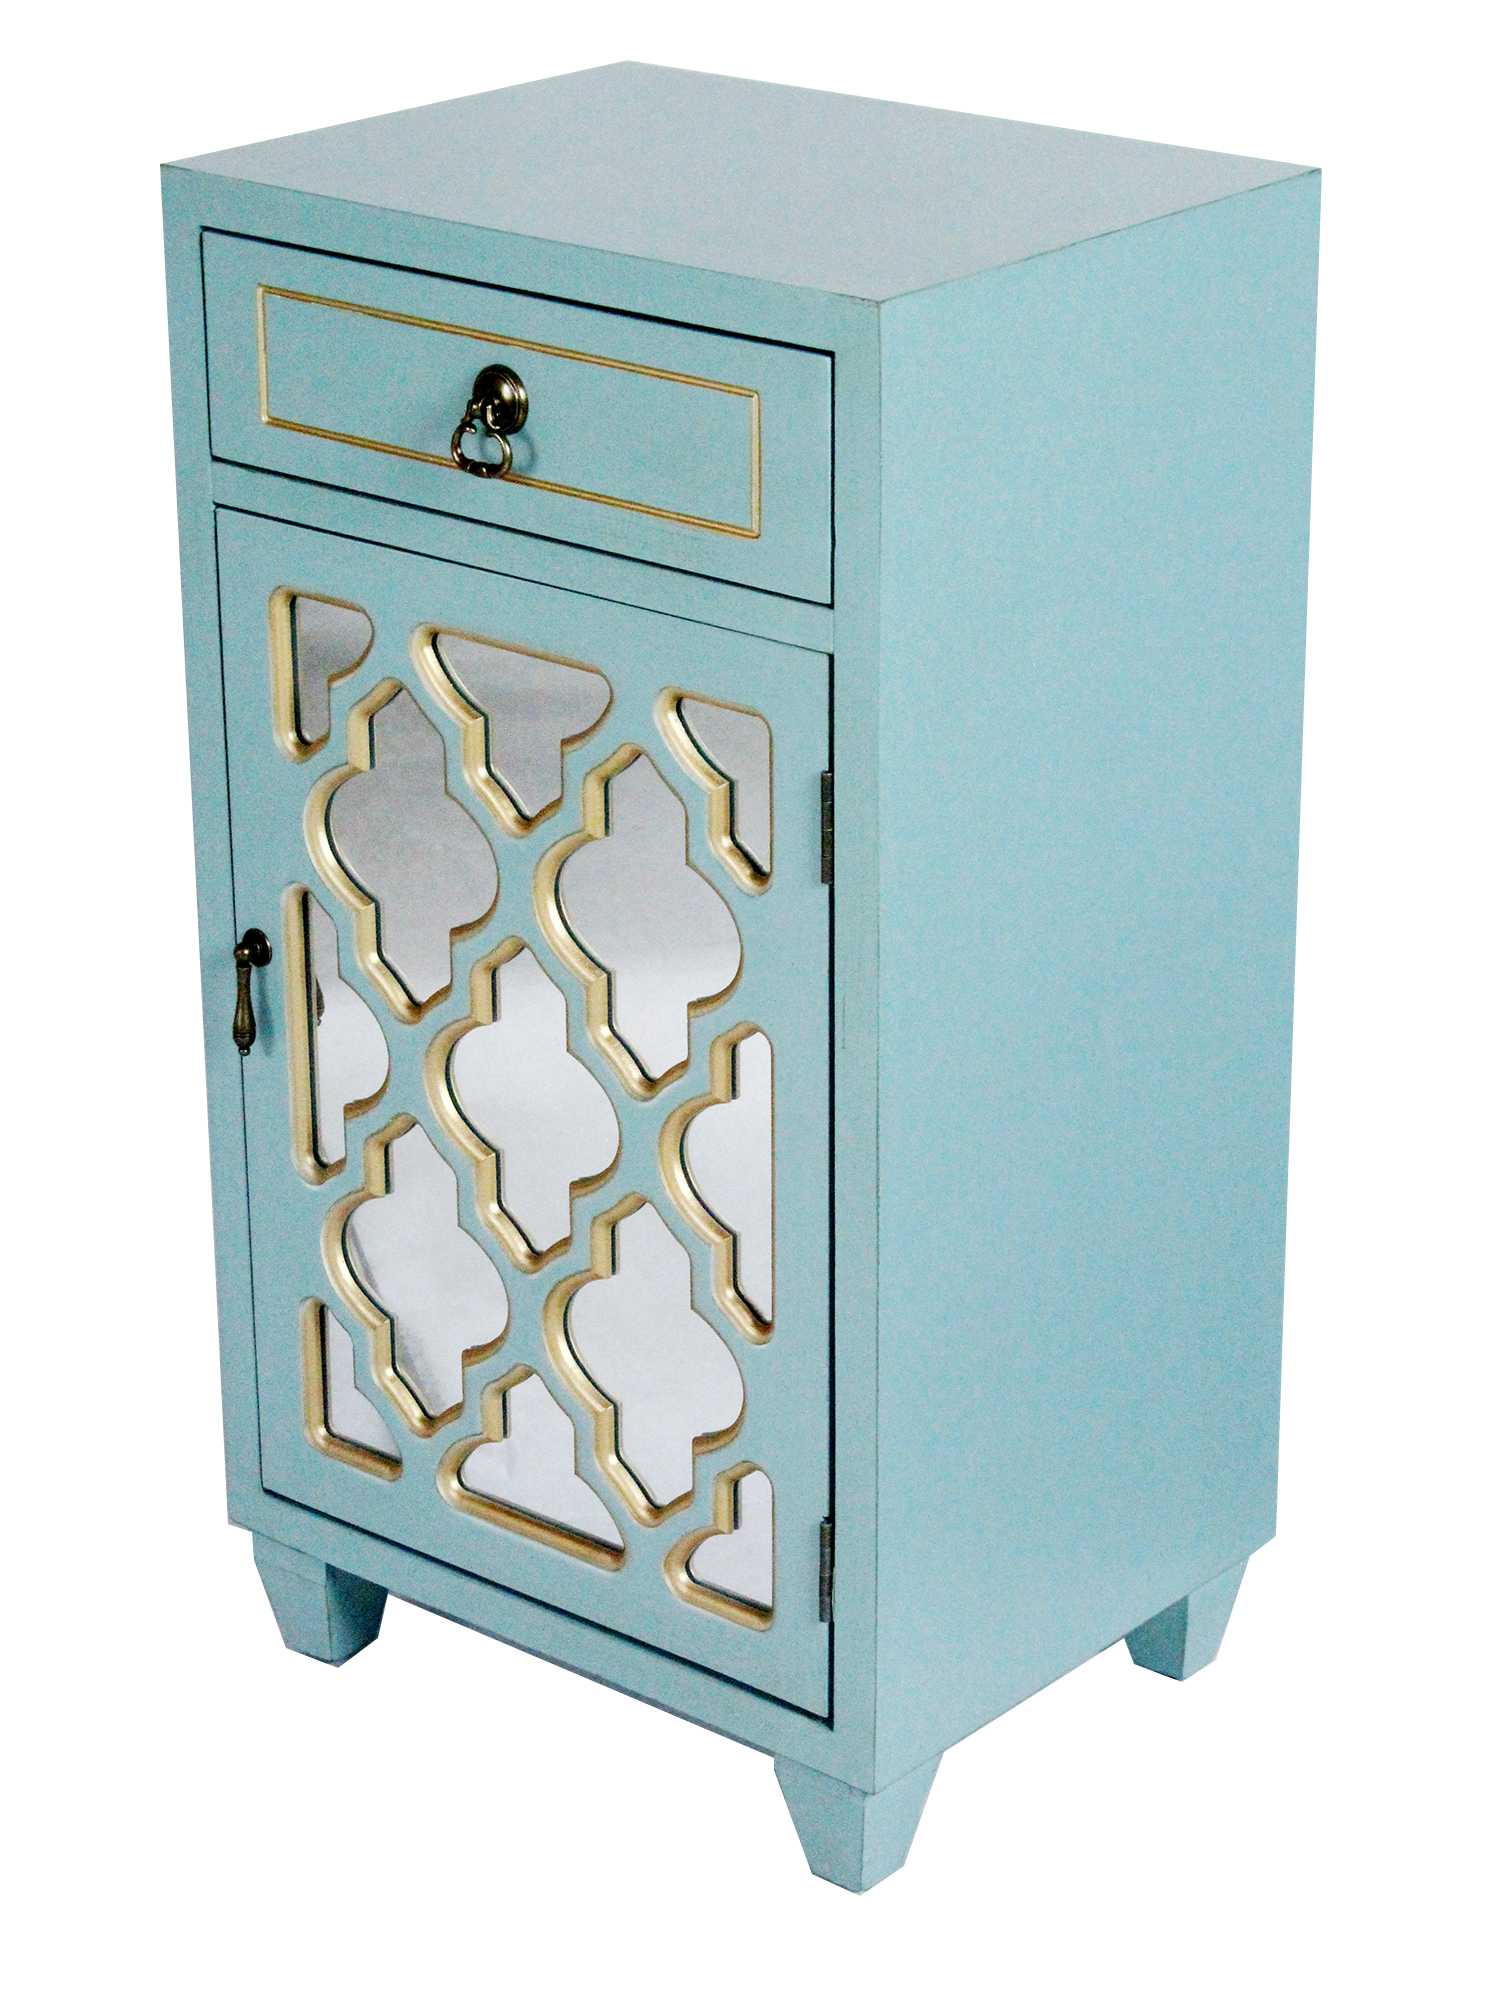 16.75" X 12.75" X 30.75" Light Blue with Gold MDF Wood Mirrored Glass Cabinet with a Drawer and a Door